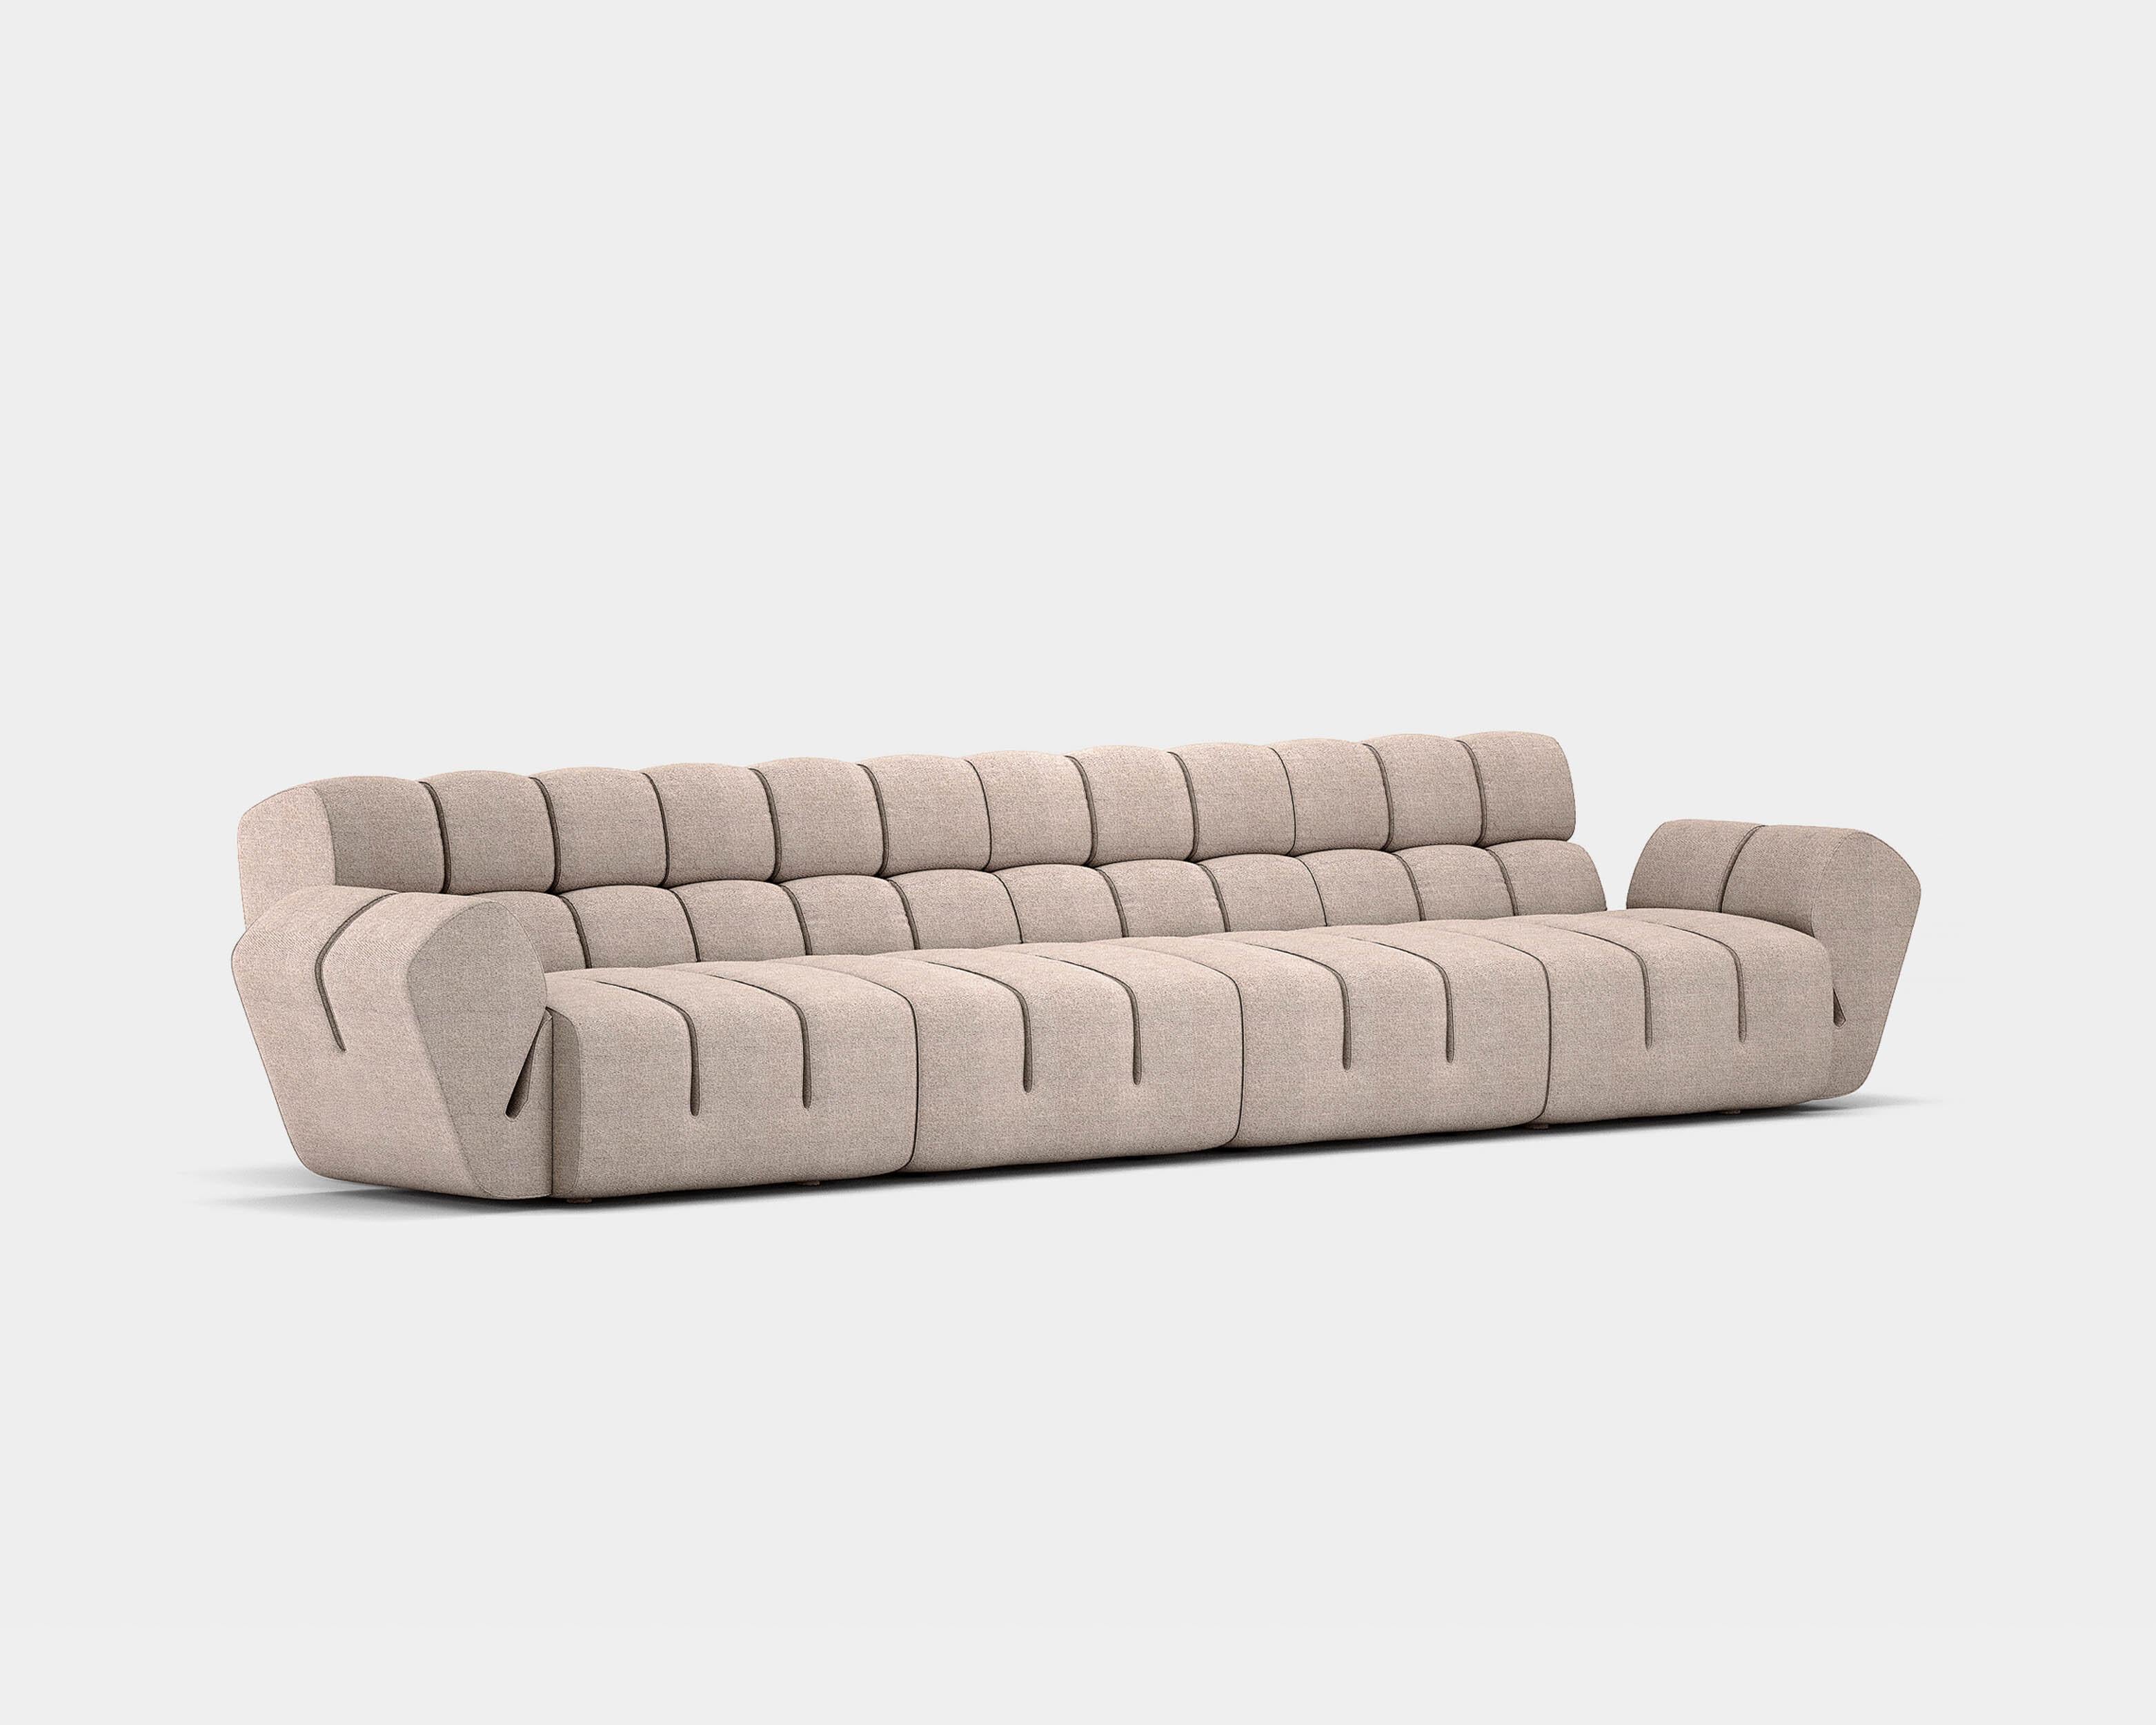 Sectional sofa Palmo by Amura Lab 
Designer: Emanuel Gargano

Model shown: textile - Brera 850 Ref. 13

Inspired by the natural gesture of an opening hand, Palmo is the new living concept designed by Emanuel Gargano.
The leather folds become the